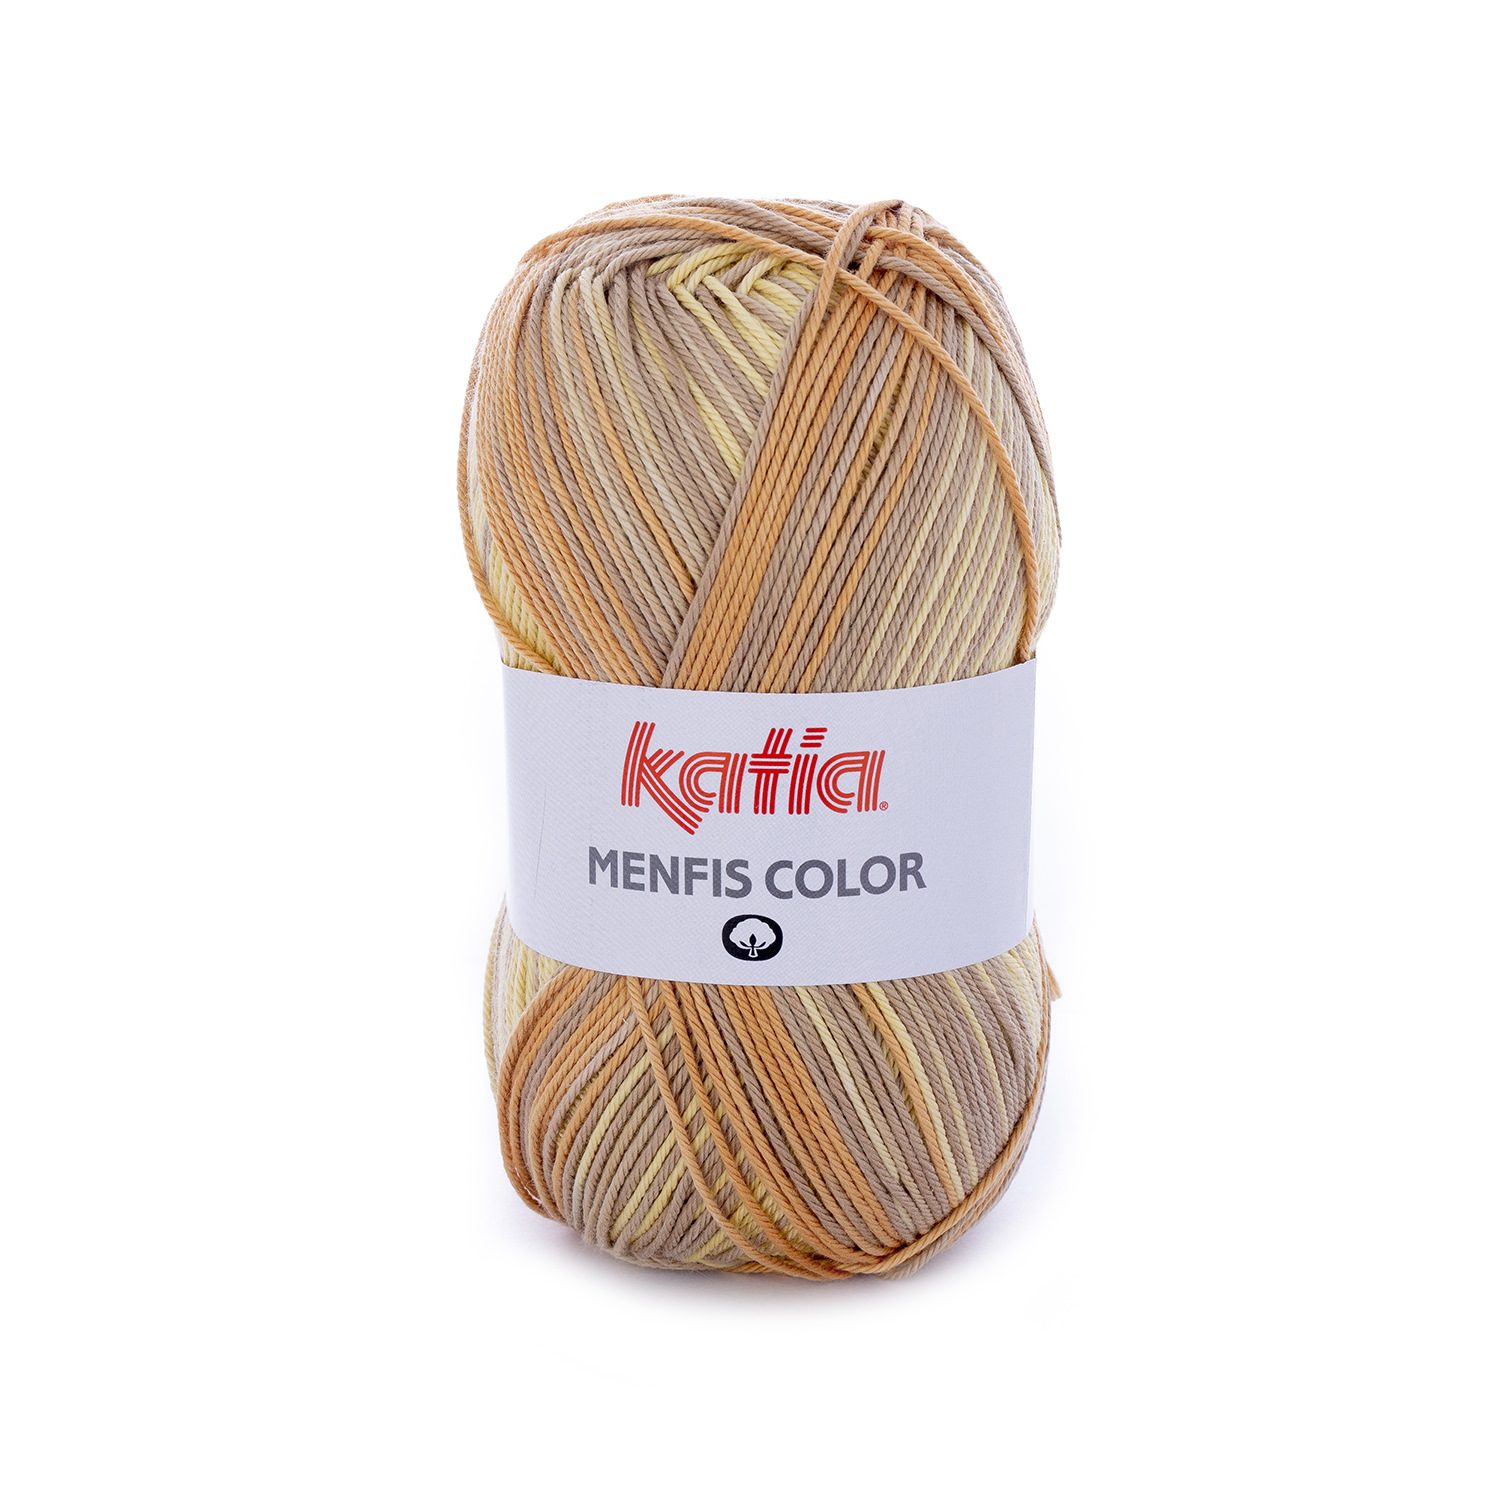 yarn-wool-menfiscolor-knit-cotton-light-yellow-beige-spring-summer-katia-104-g